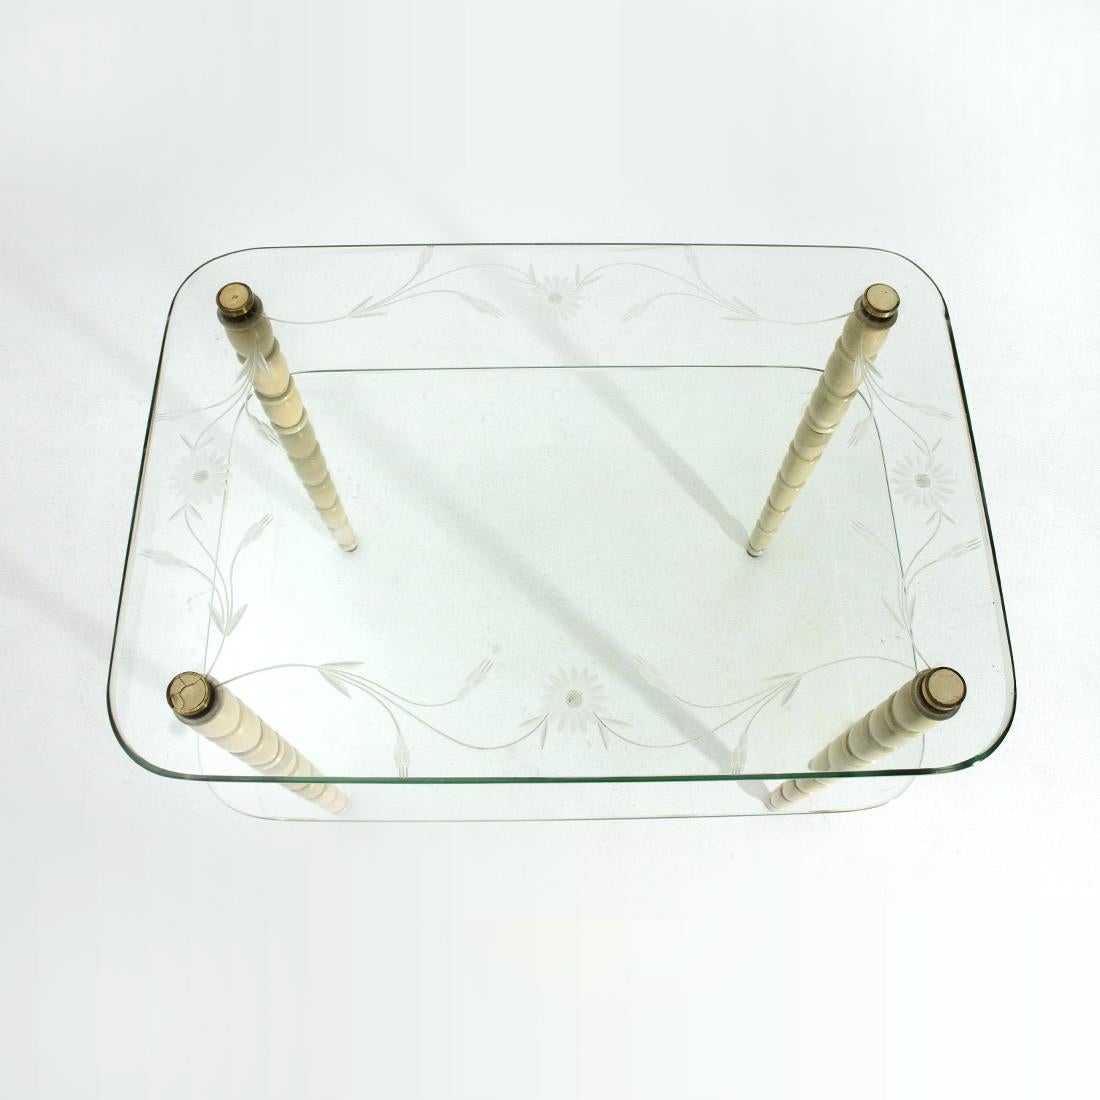 Brass Coffee Table with Legs in White Lacquered Wood and Glass Tops, 1930s For Sale